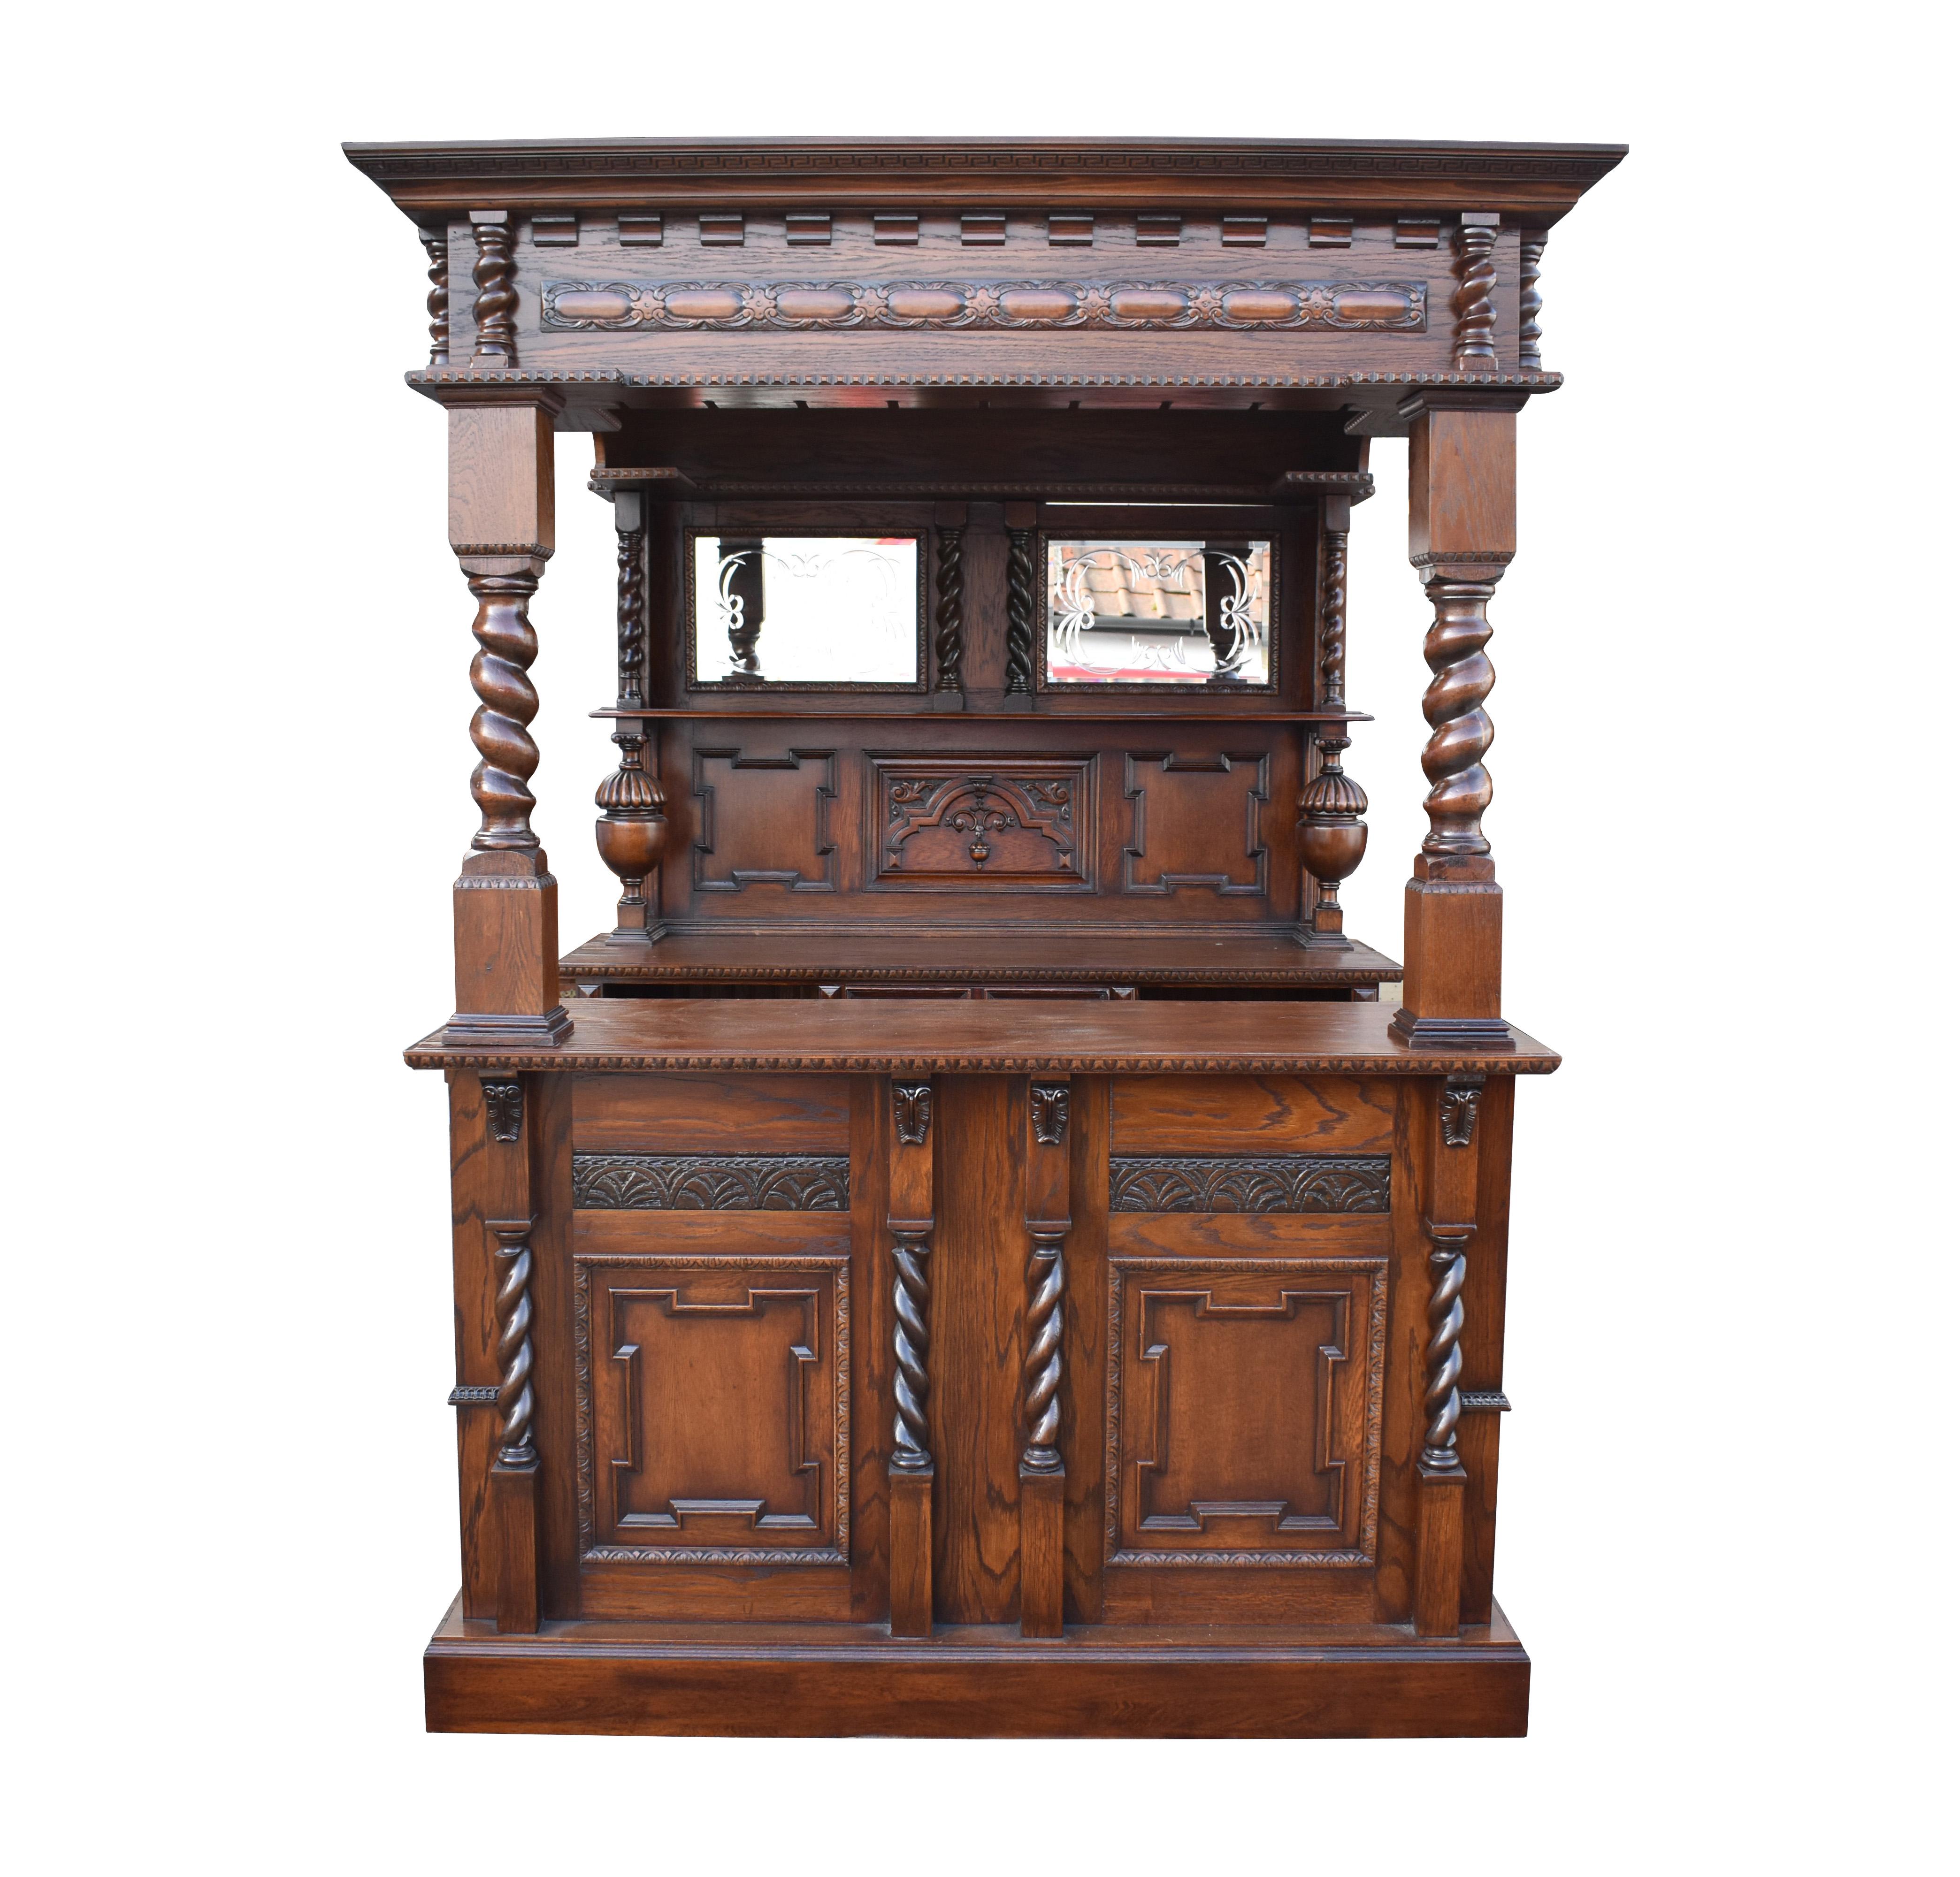 For sale is a good quality 1920's Jacobean style oak bar. The canopy top having two stained glass panels, above a mirror back with each mirror being hand engraved. Below this Jacobean style carvings, flanked by bulbous supports and barley twist